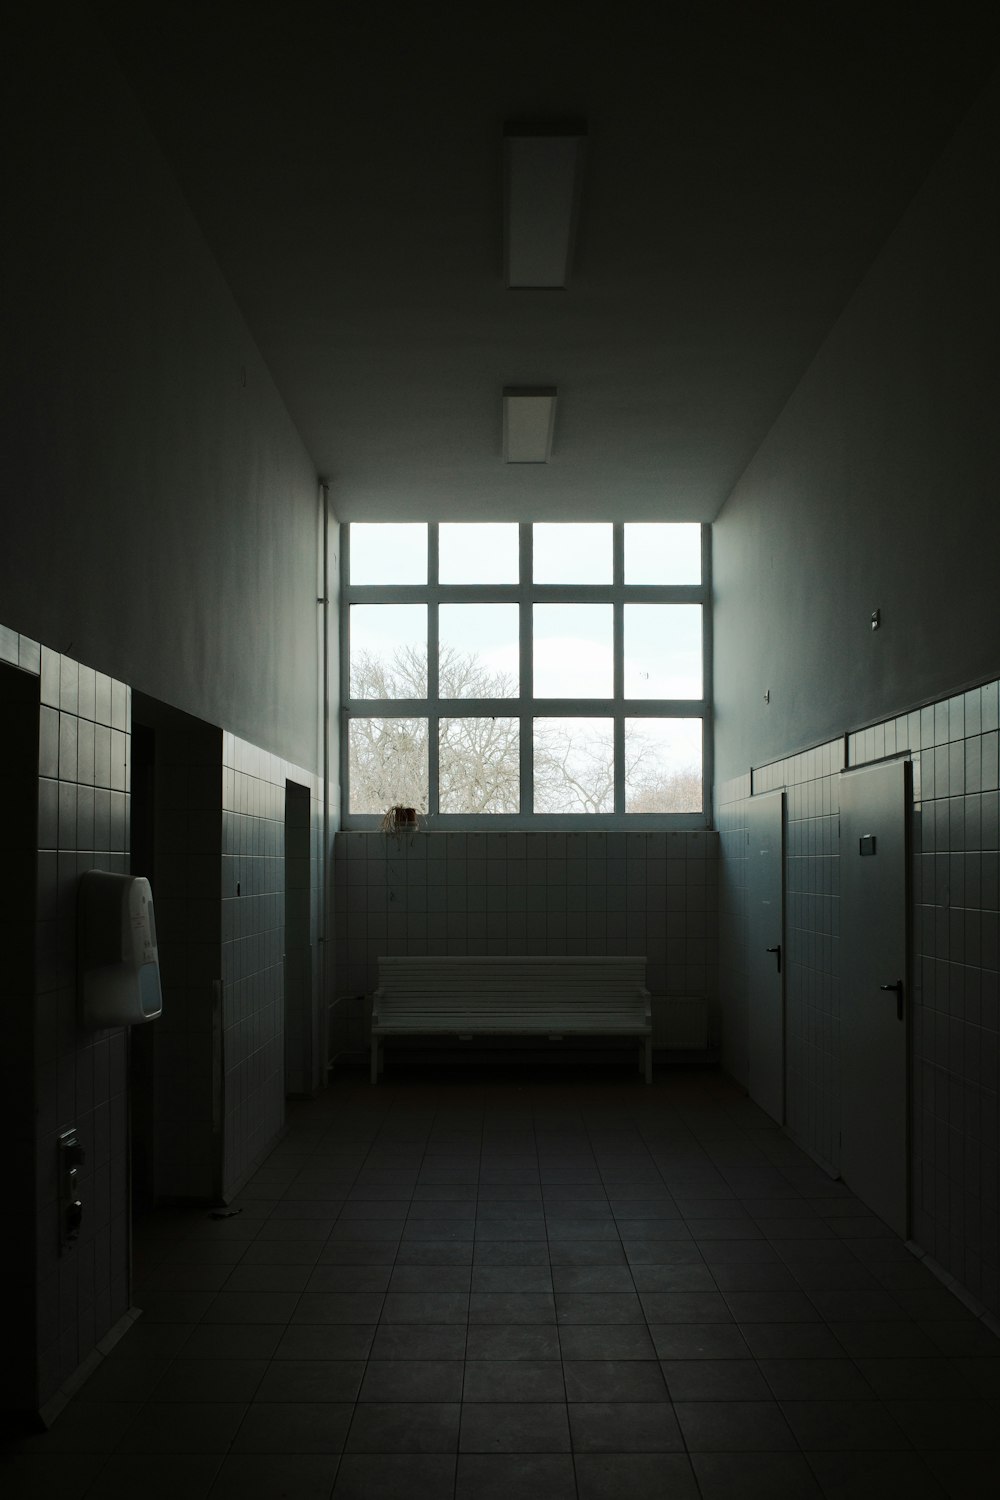 a dimly lit room with a bench and urinals